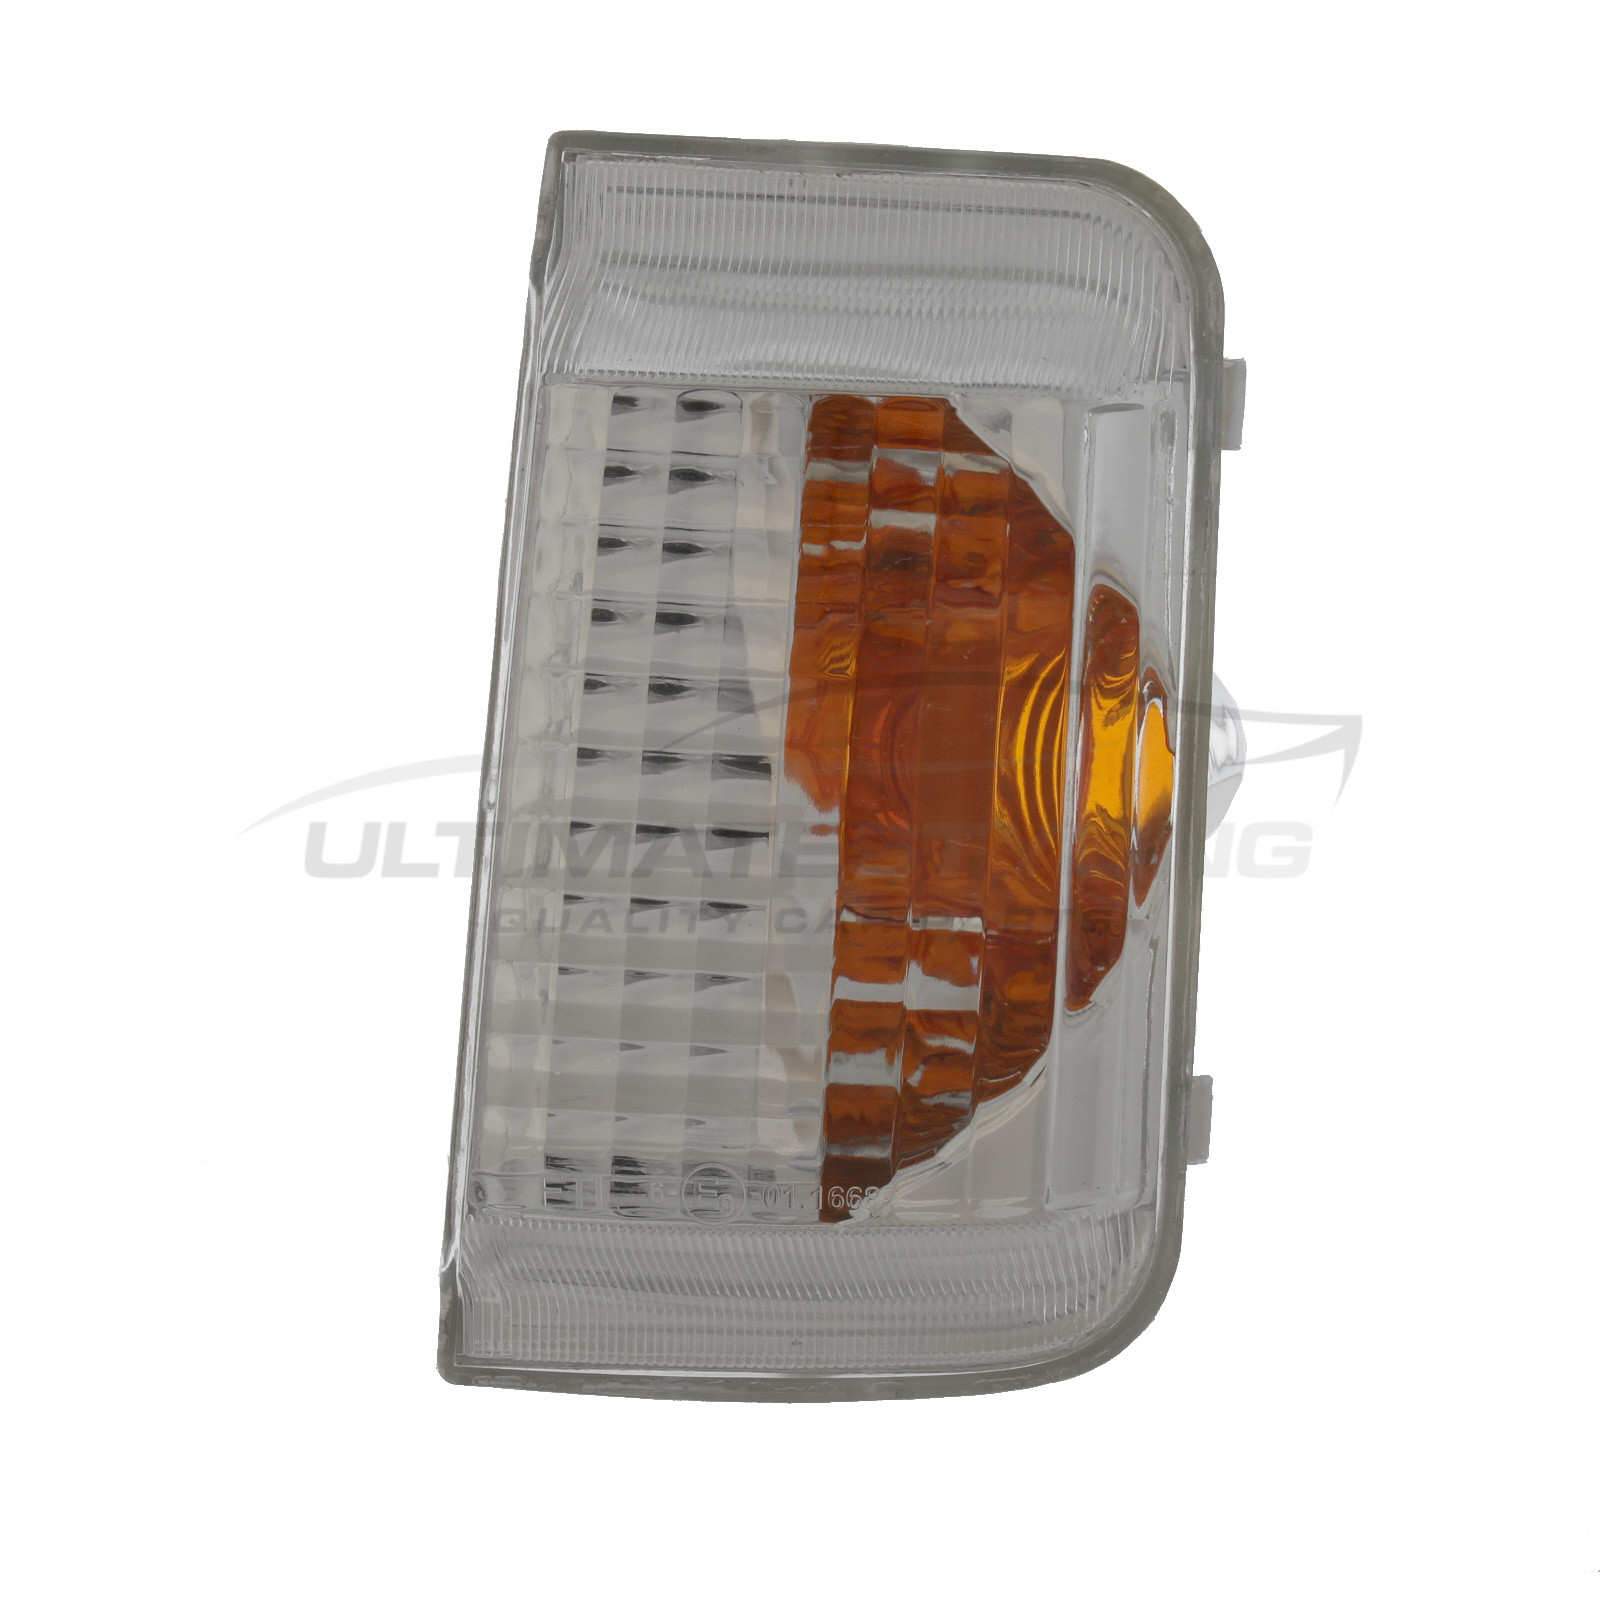 Citroen Relay 2006->, Fiat Ducato 2006->, Peugeot Boxer 2006->, Vauxhall Movano 2021-> Clear Non-LED To Suit Clear Bulb (Not Included) Mirror Indicator Includes Amber Reflector Drivers Side (RH)